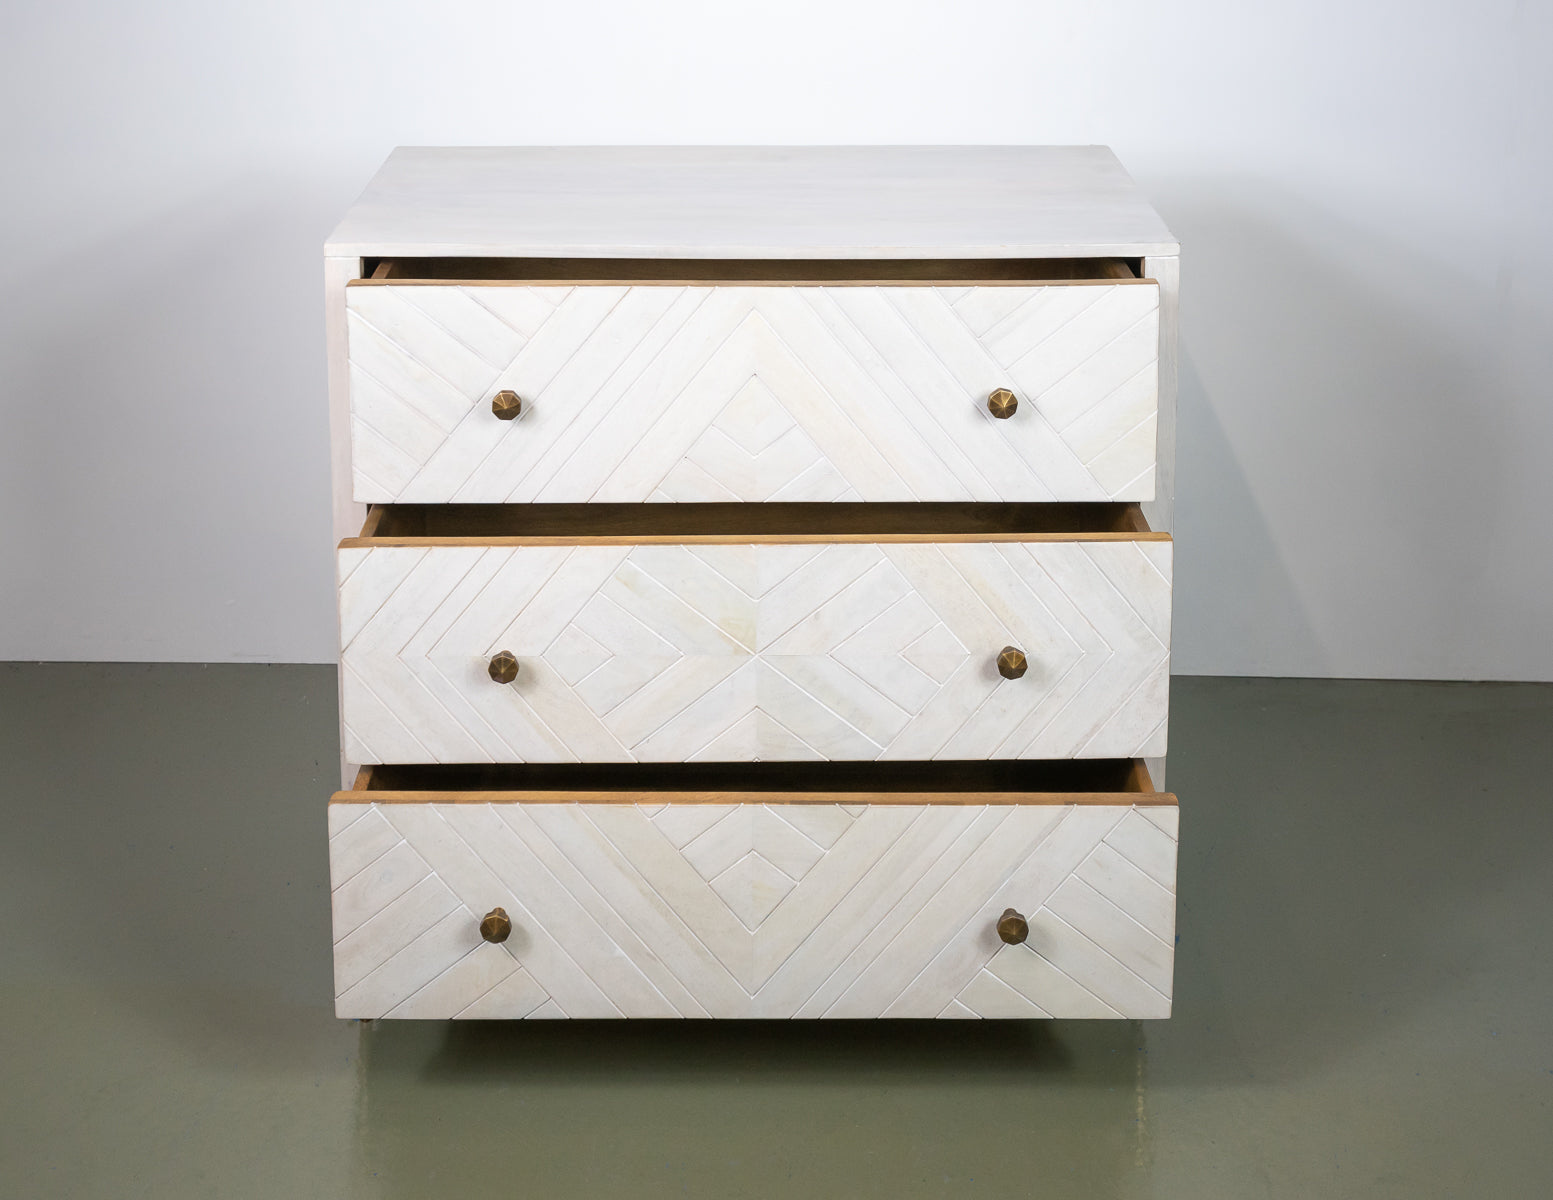 Anthropologie Chest of Drawers